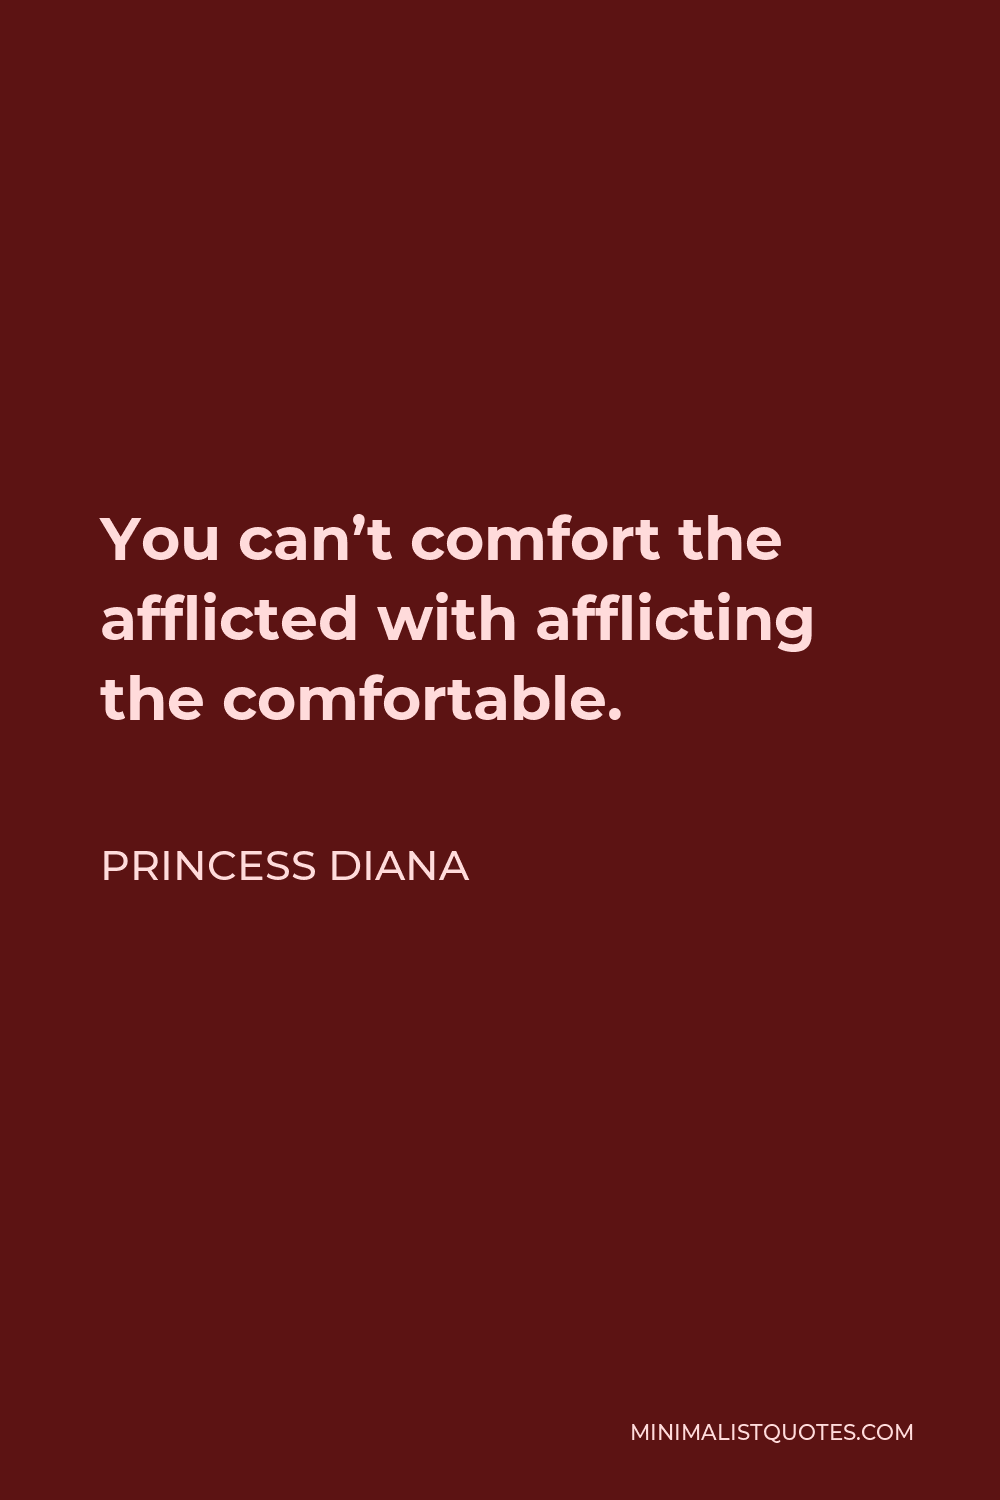 Princess Diana Quote - You can’t comfort the afflicted with afflicting the comfortable.